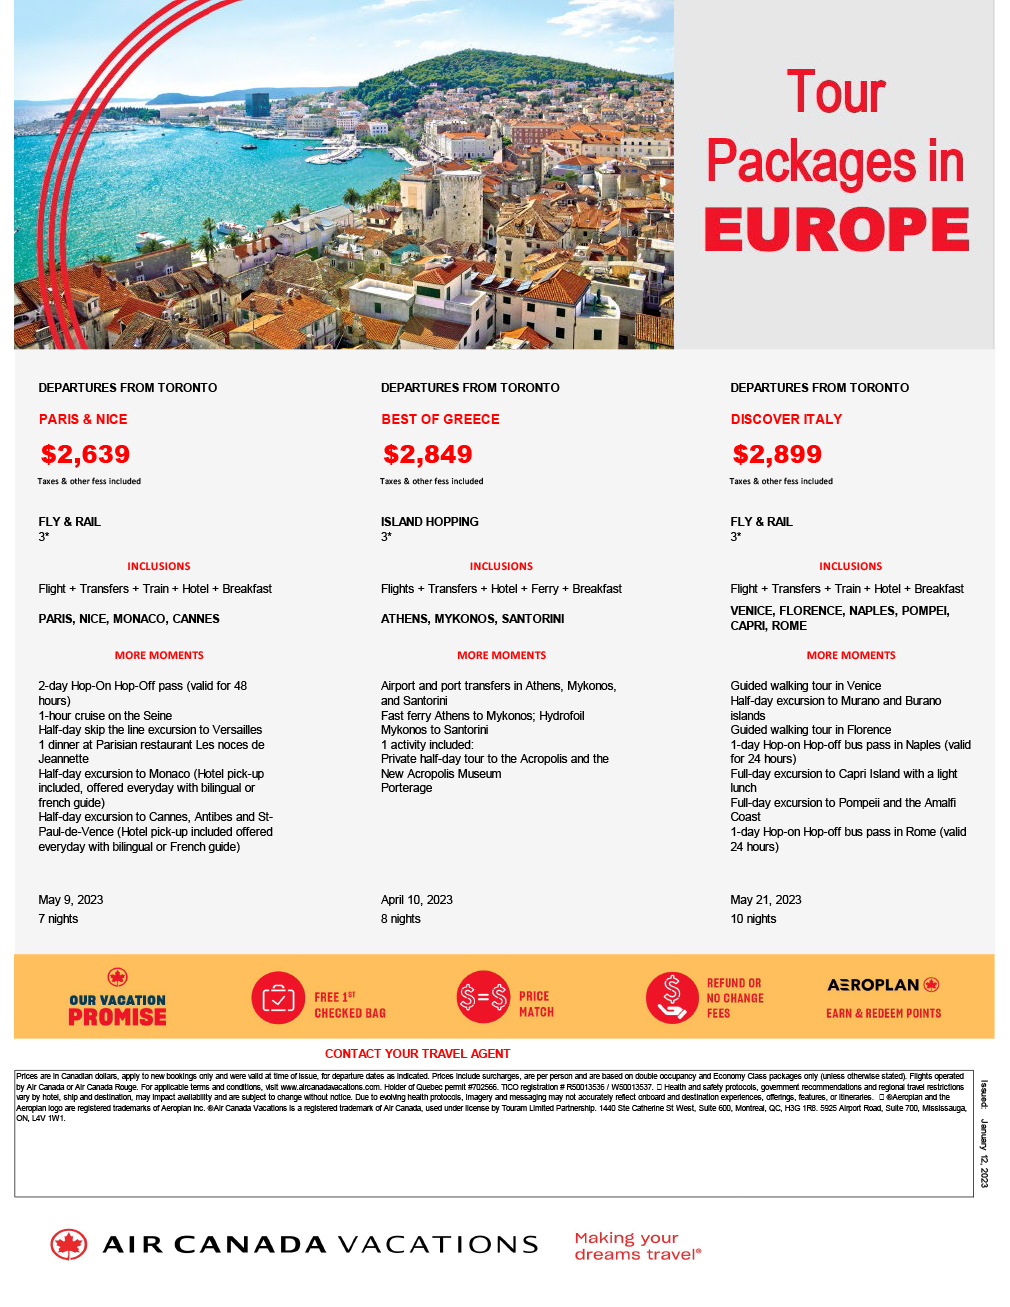 Tour Packages In Europe